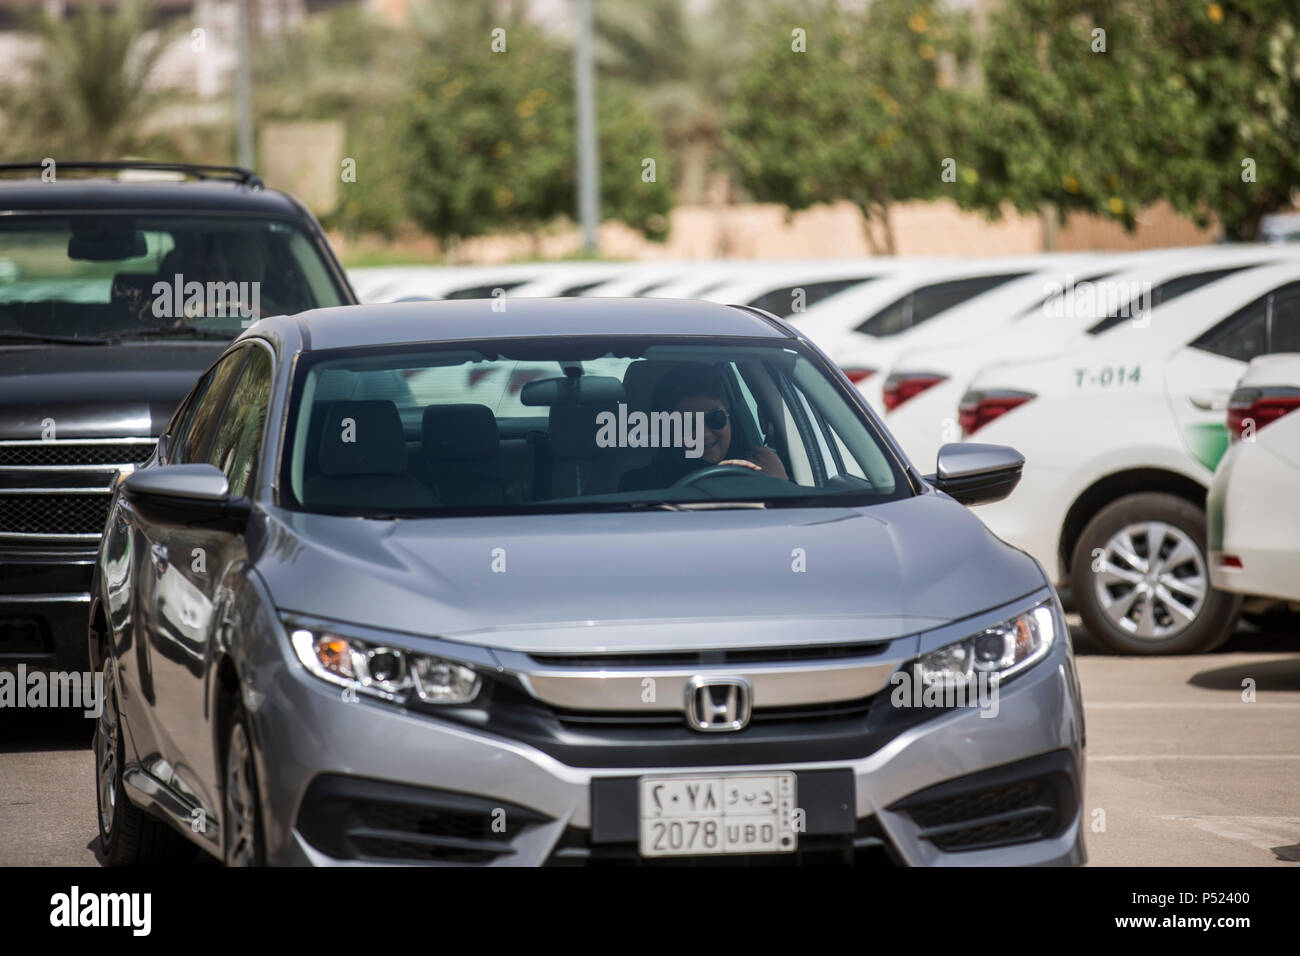 Riyadh, Saudi Arabia. 24th June, 2018. A Saudi woman drives her car on the first day after lifting the driving ban on women, in Riyadh, Saudi Arabia, 24 June 2018. Women in Saudi Arabia got behind the wheel on Sunday after a decades-long ban was lifted as part of a liberalization drive in the conservative kingdom. Credit: Gehad Hamdy/dpa/Alamy Live News Stock Photo